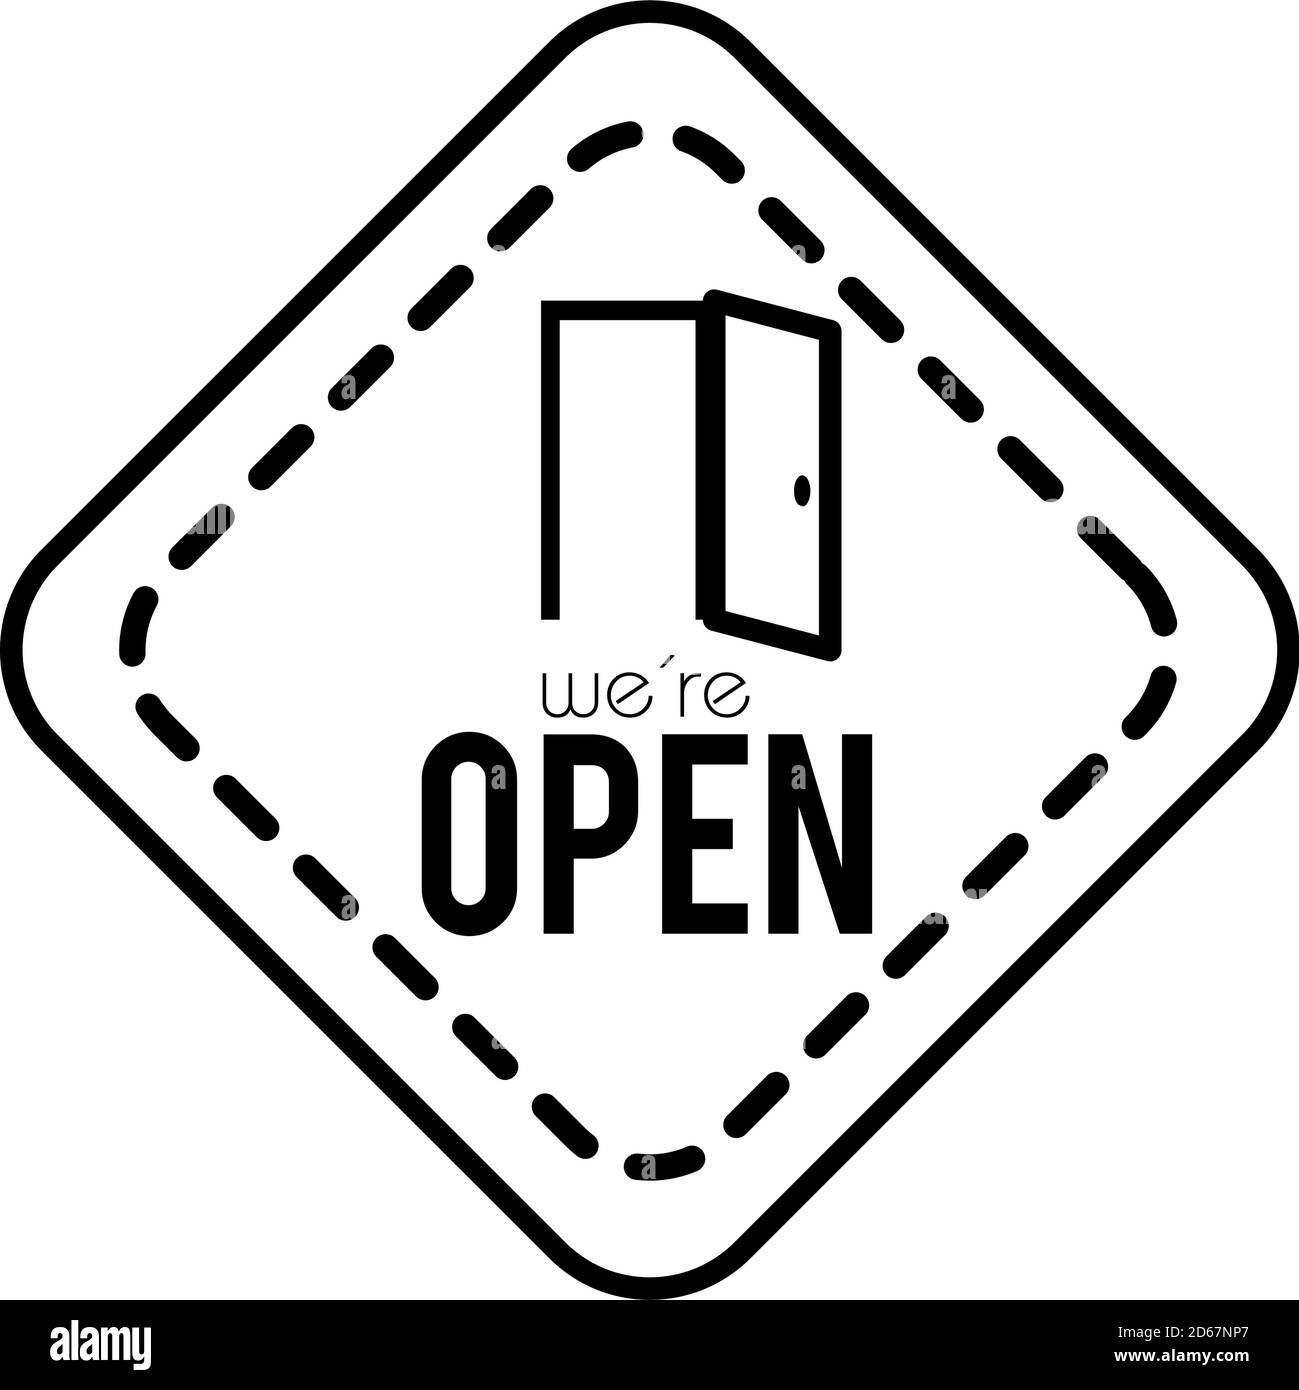 we are open triangle sign with open door icon over white background